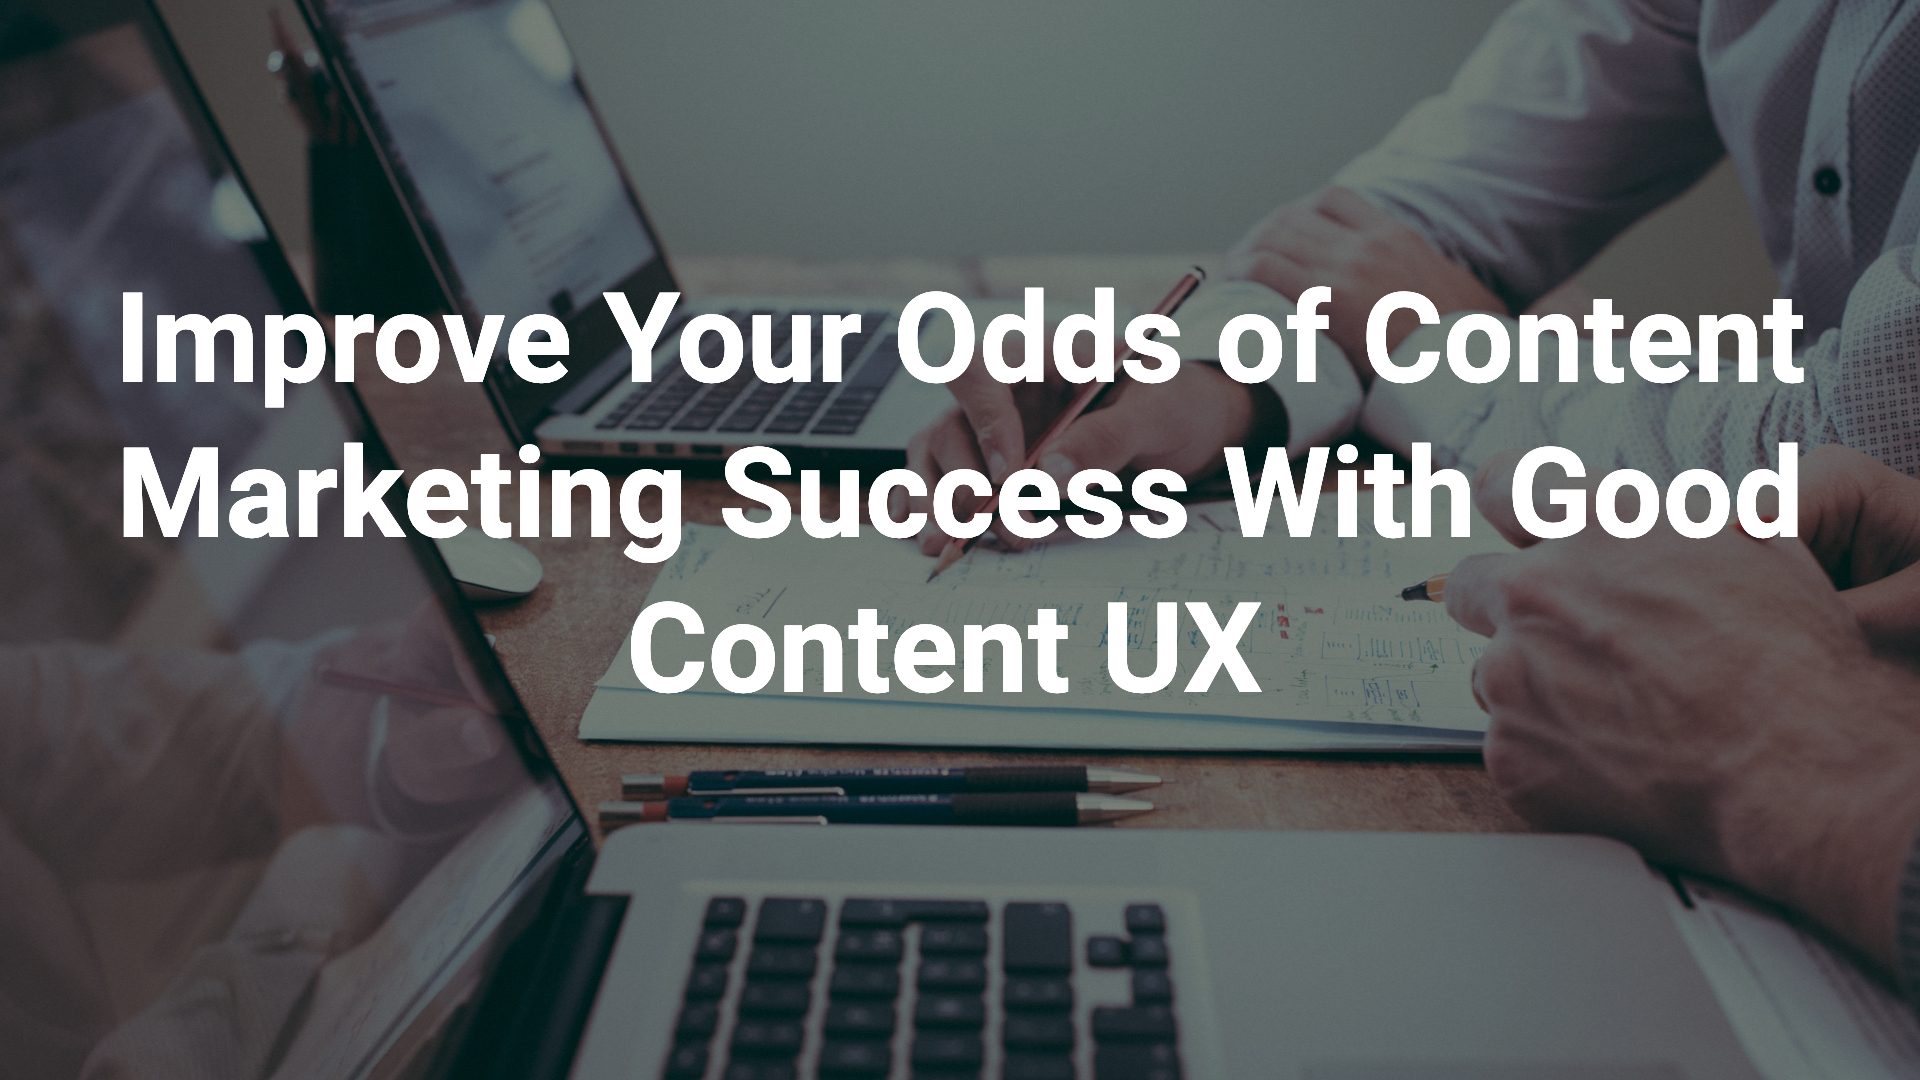 Improve Your Odds of Content Marketing Success With Good Content UX